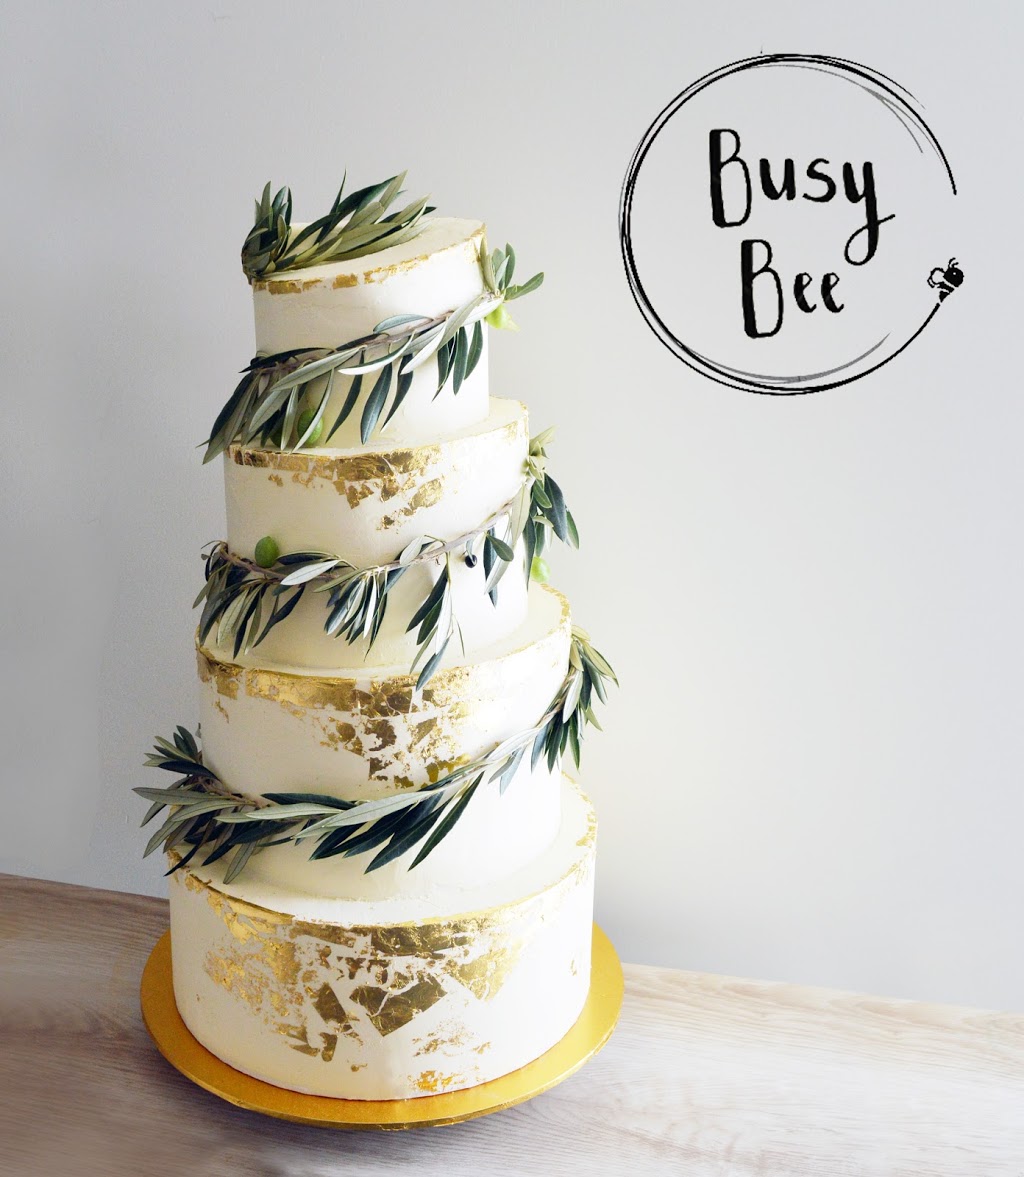 Busy Bee Cakes and Cupcakes | Boardwalk Blvd, Point Cook VIC 3030, Australia